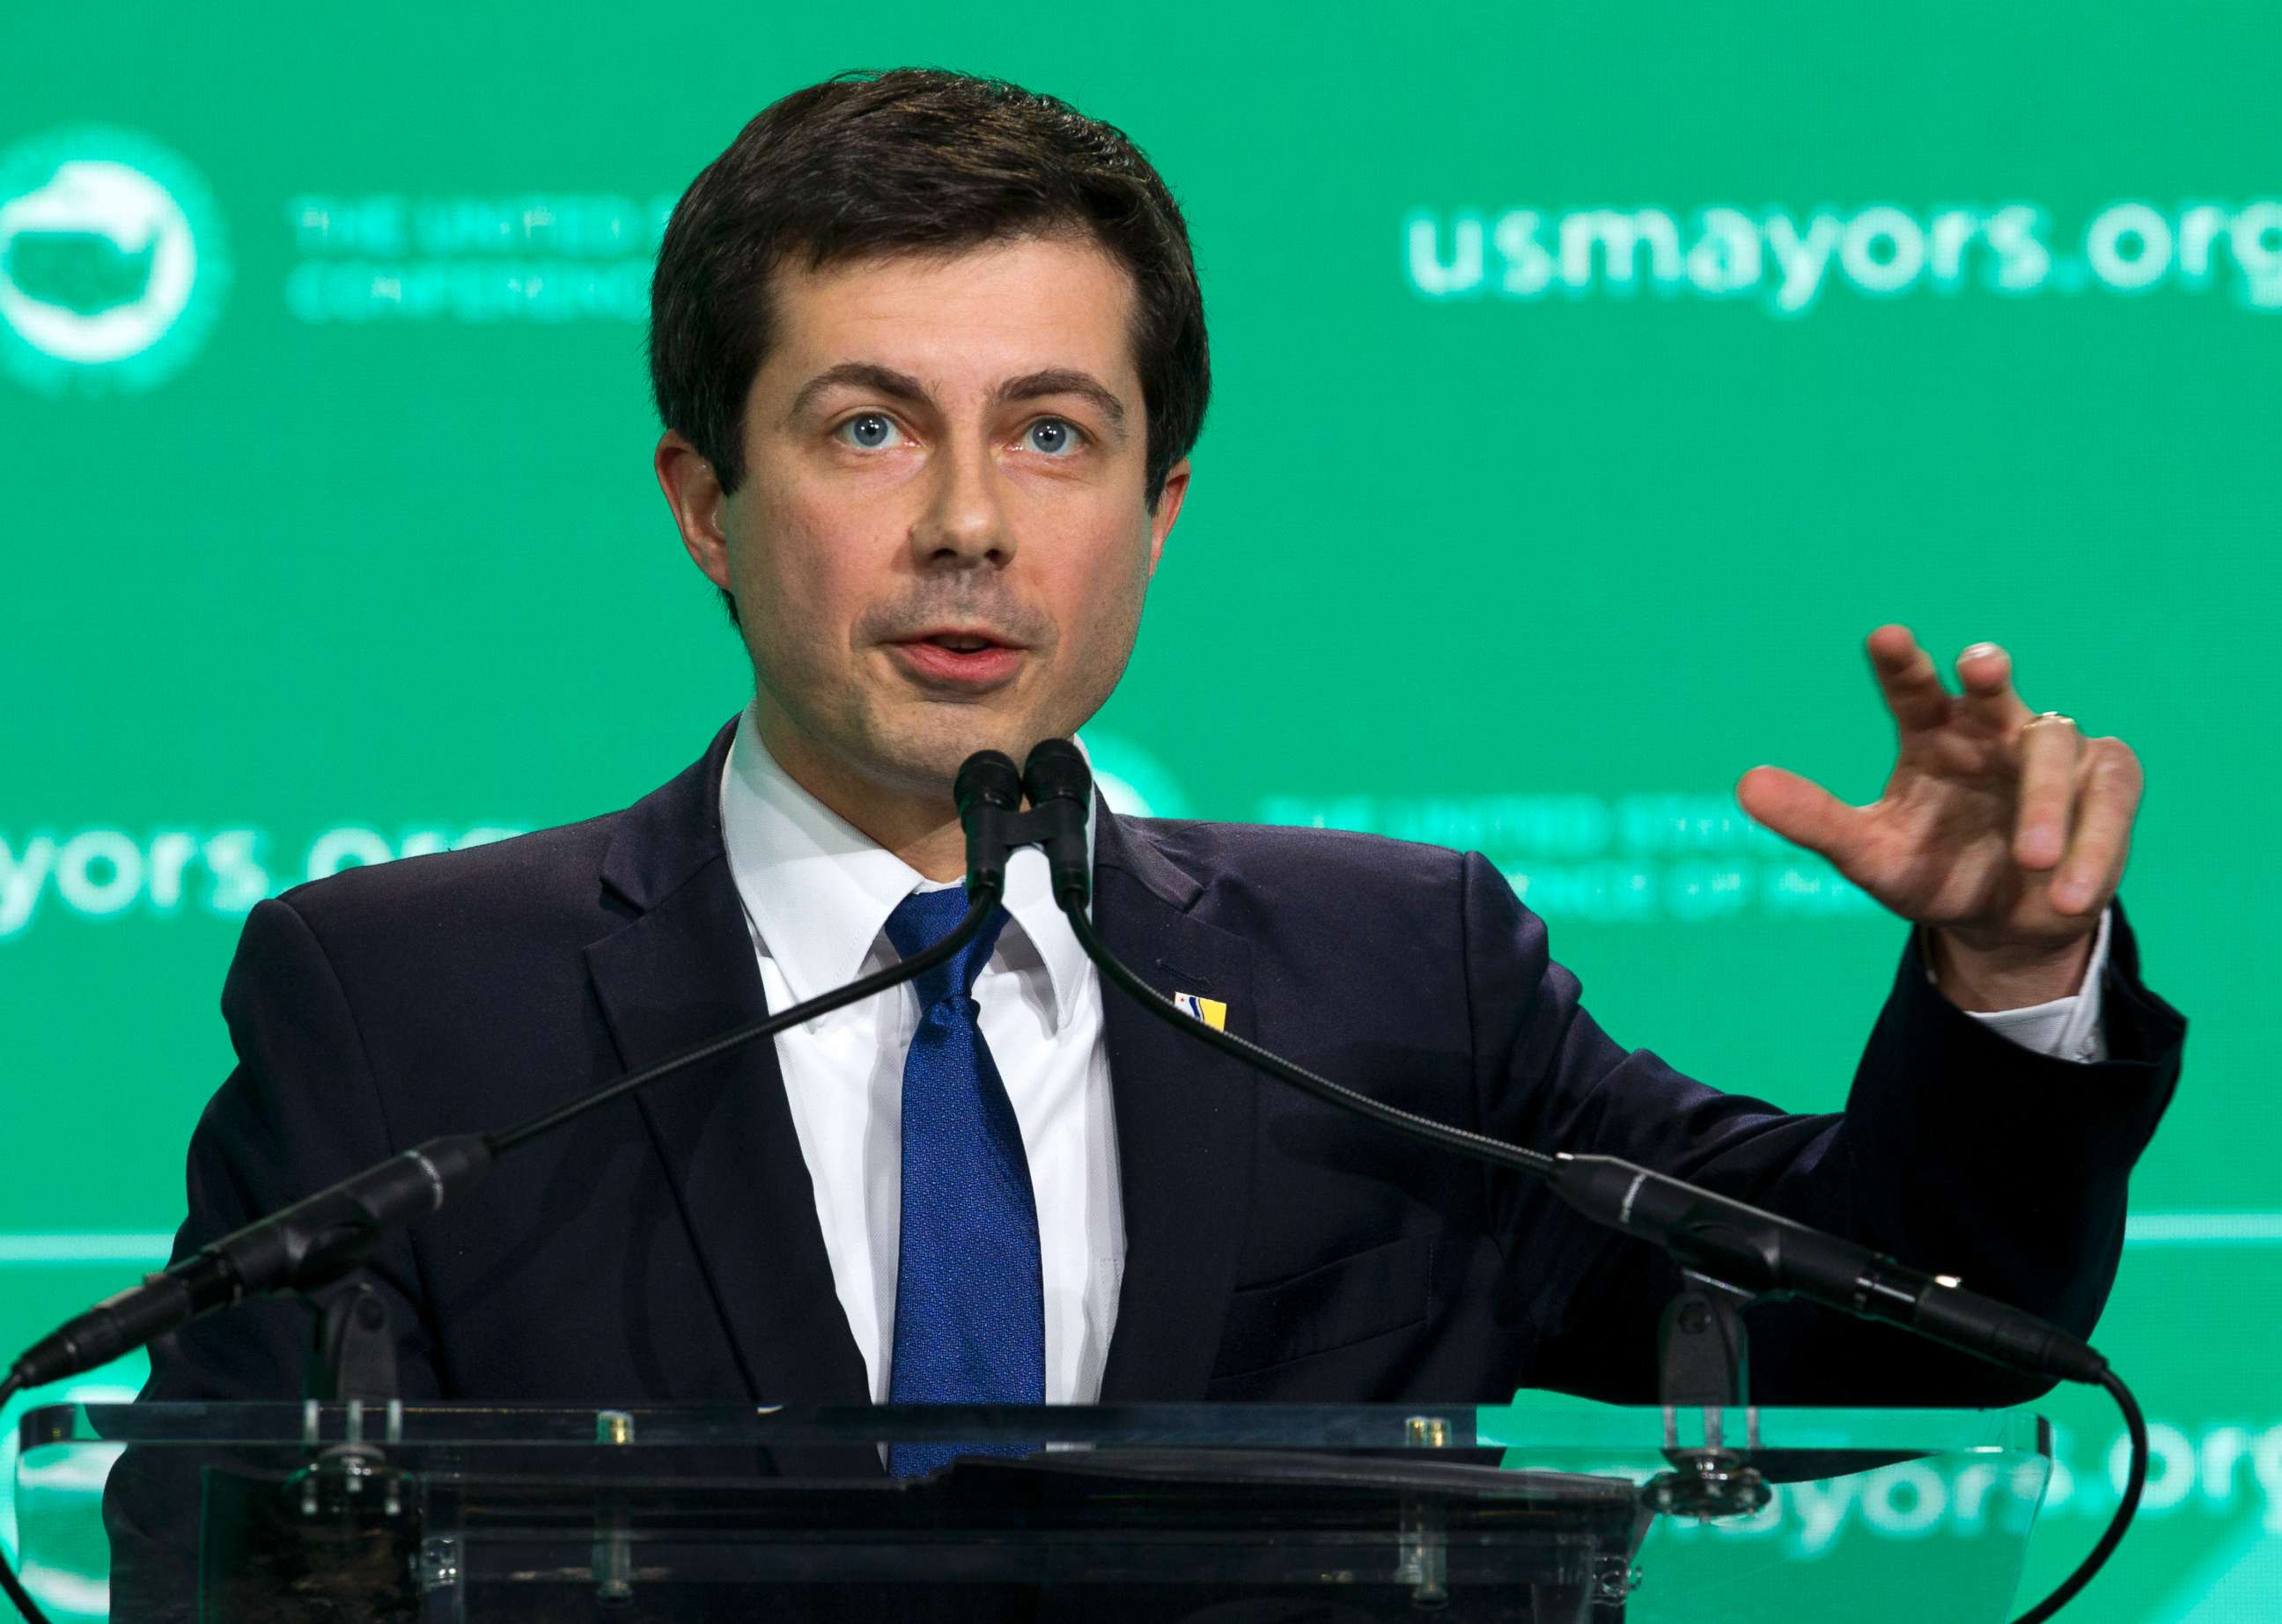 PHOTO: Pete Buttigieg, Mayor of South Bend, Ind., speaks during the U.S. Conference of Mayors winter meeting in Washington, D.C., Jan. 24, 2019.